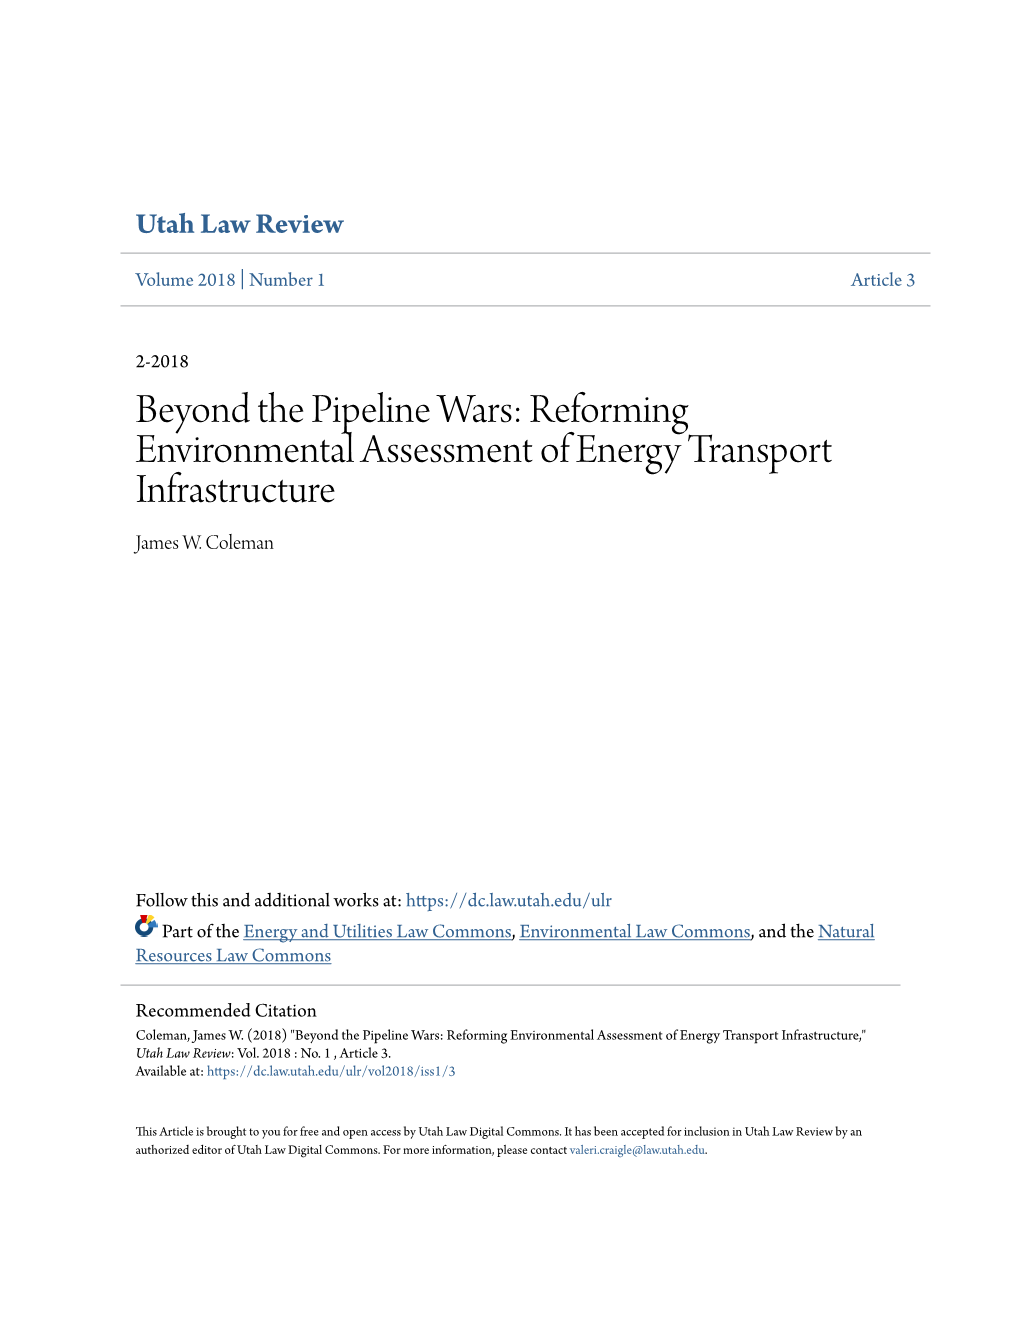 Beyond the Pipeline Wars: Reforming Environmental Assessment of Energy Transport Infrastructure James W